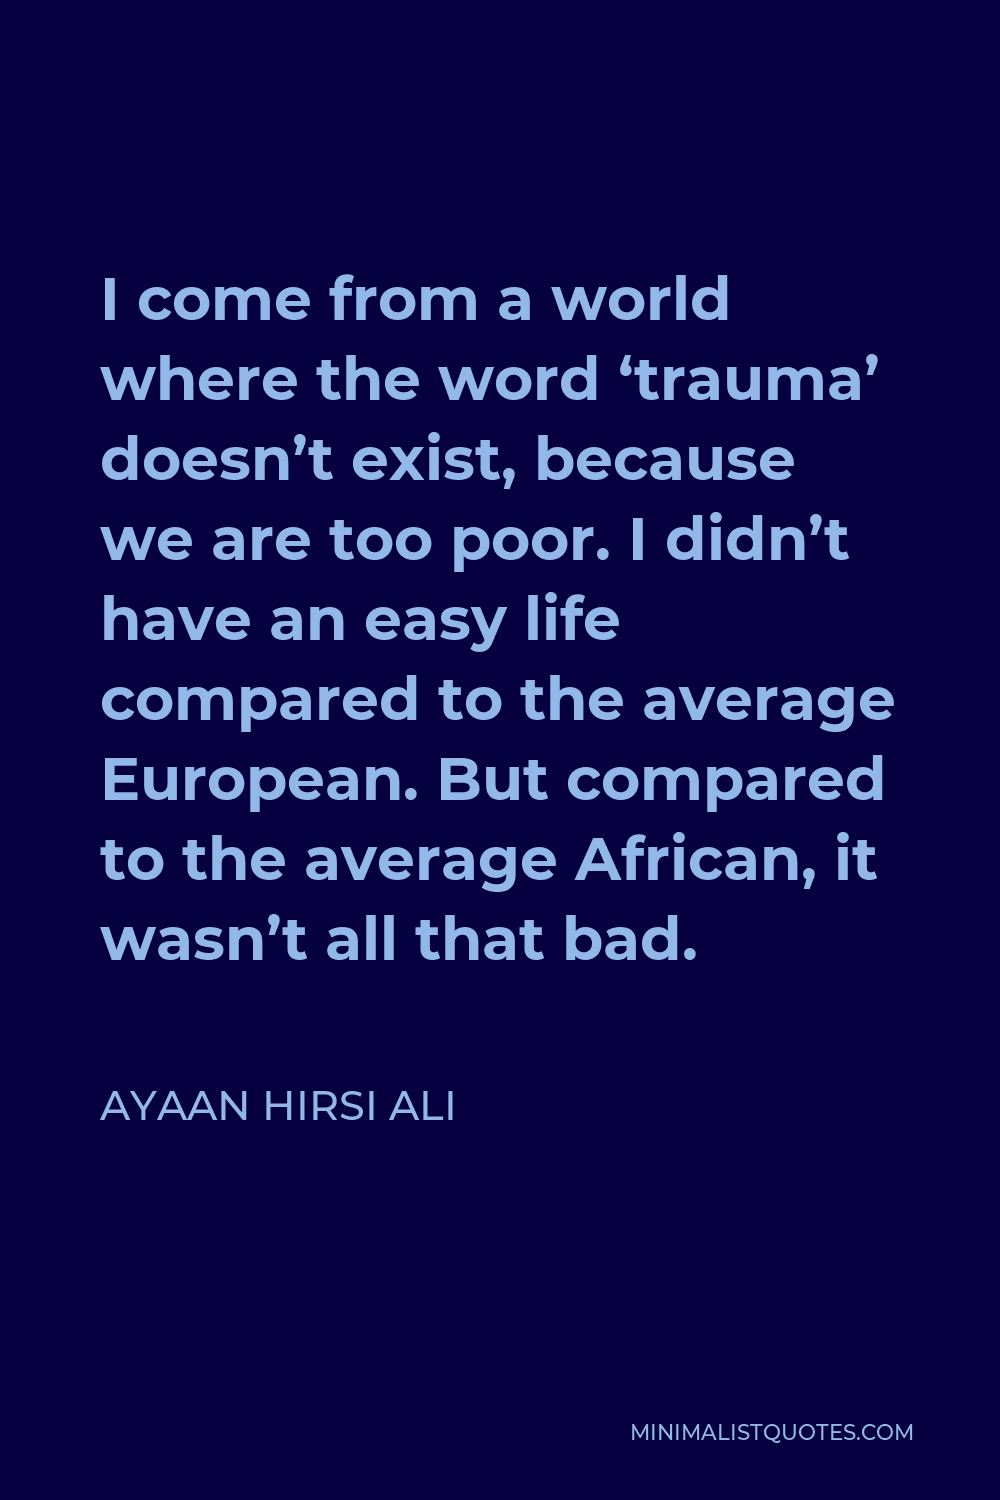 Ayaan Hirsi Ali Quote - I come from a world where the word ‘trauma’ doesn’t exist, because we are too poor. I didn’t have an easy life compared to the average European. But compared to the average African, it wasn’t all that bad.